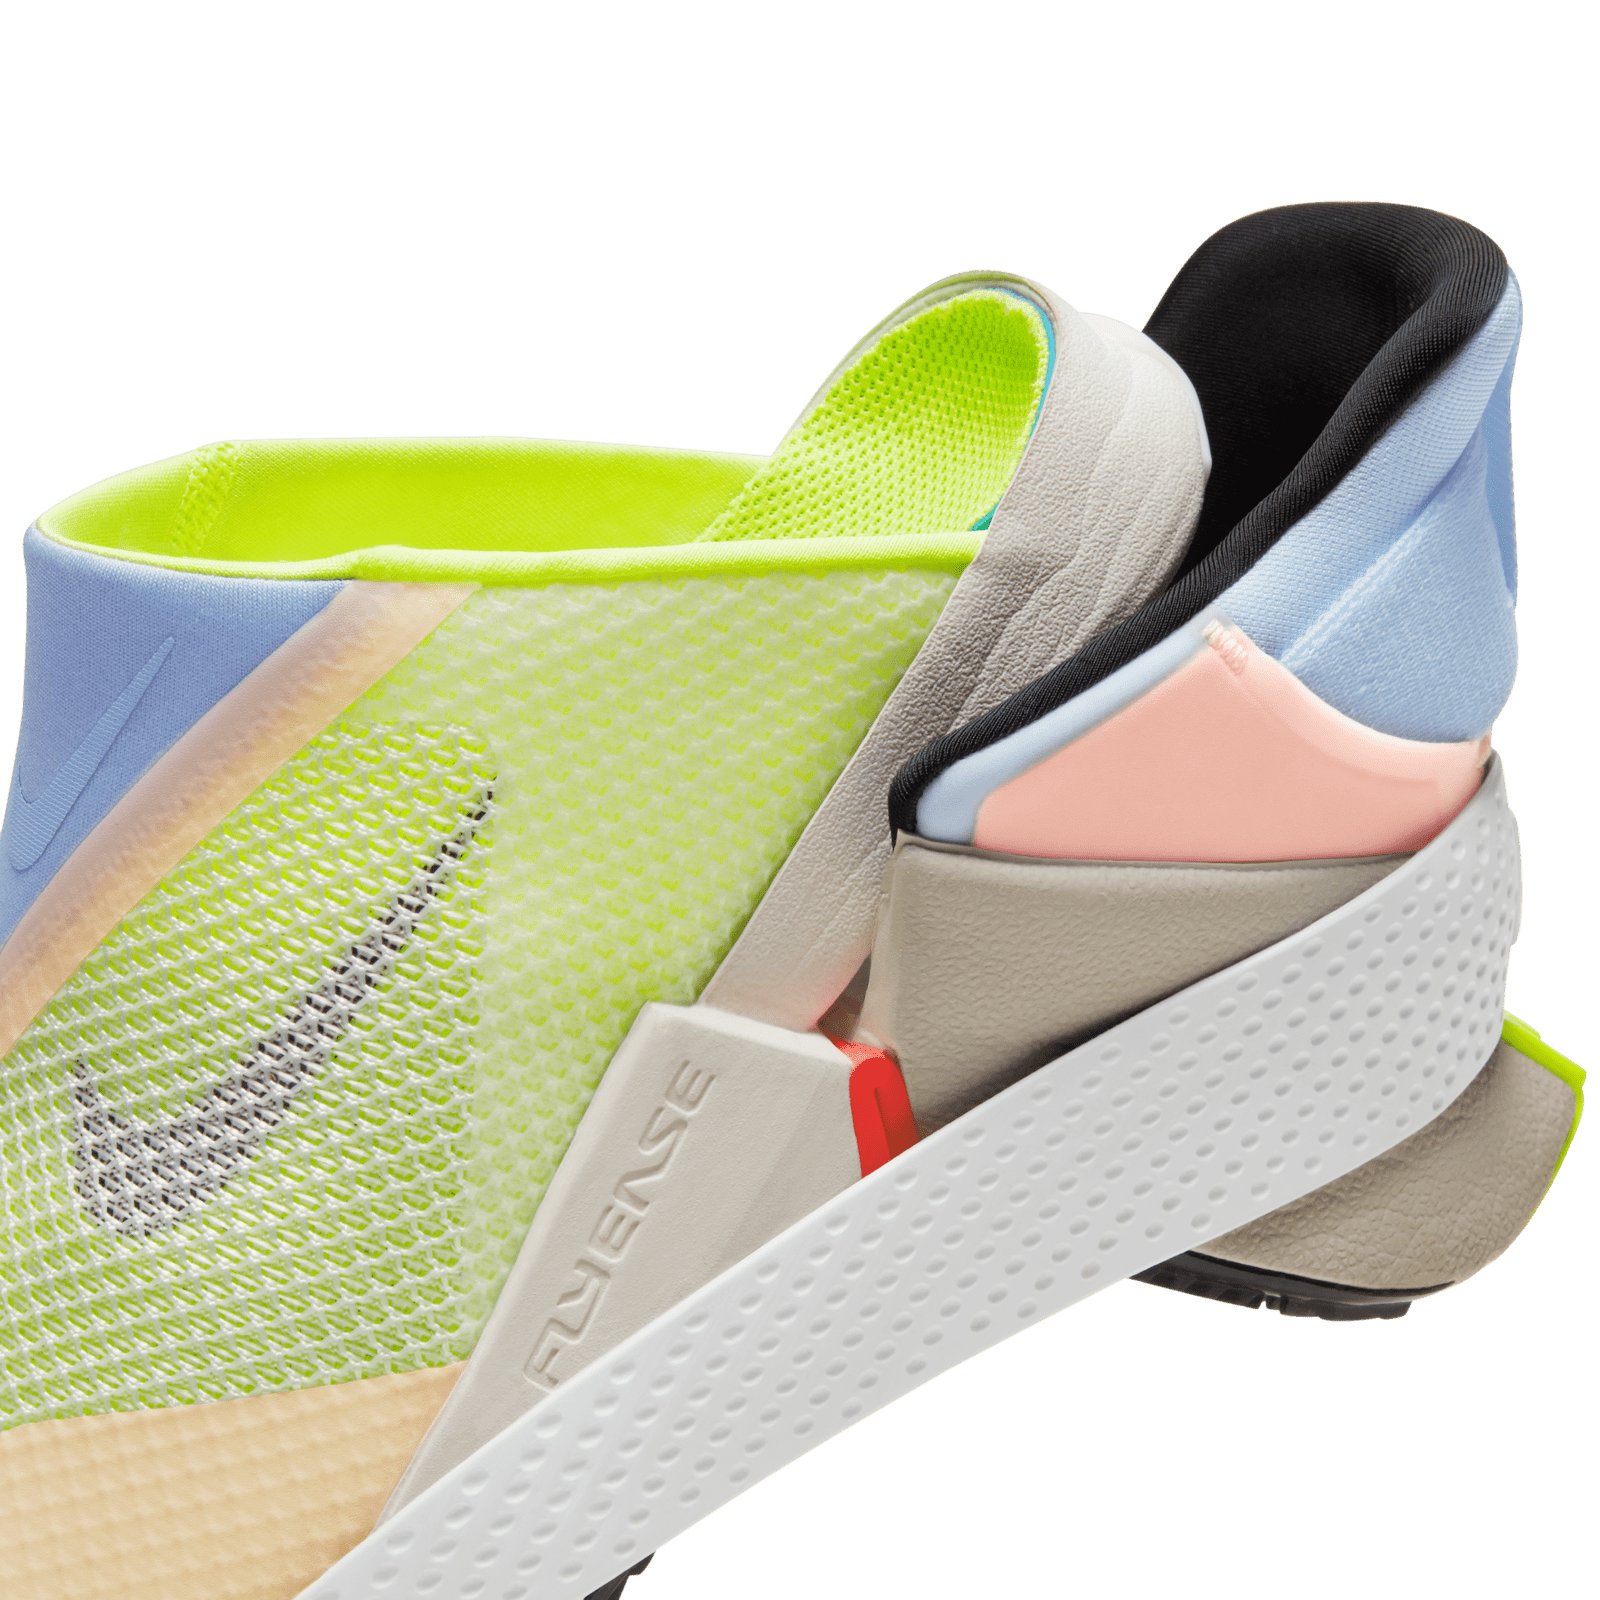 slip on gym shoes